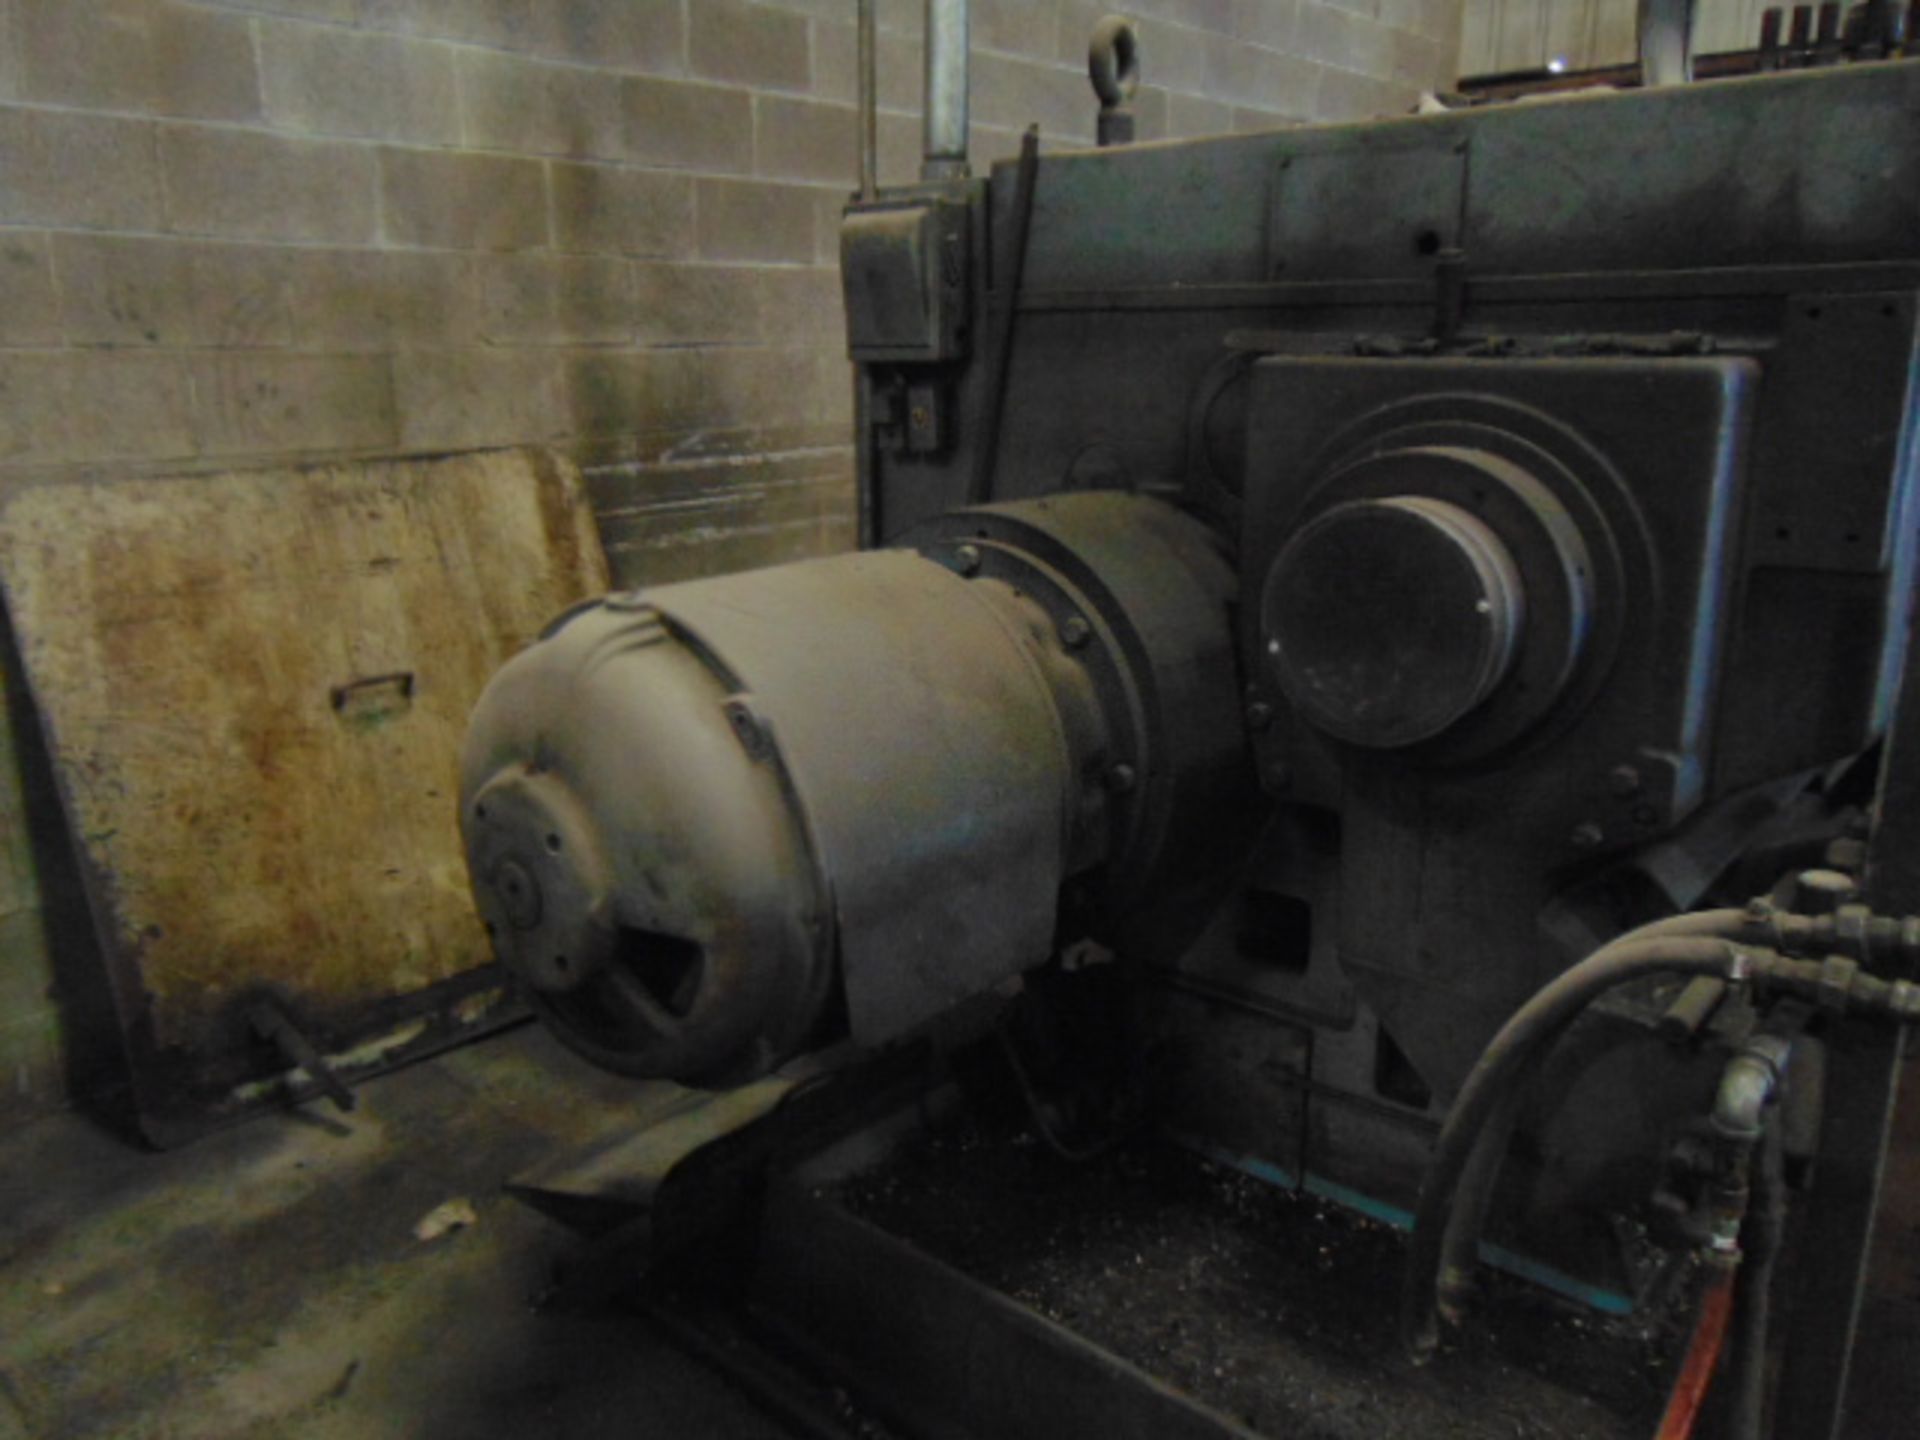 TURRET LATHE, WARNER & SWASEY 4A MDL. M-3550, 9.5" bore, 24" 3-jaw chuck, S/N 1546007 (Loading - Image 6 of 9